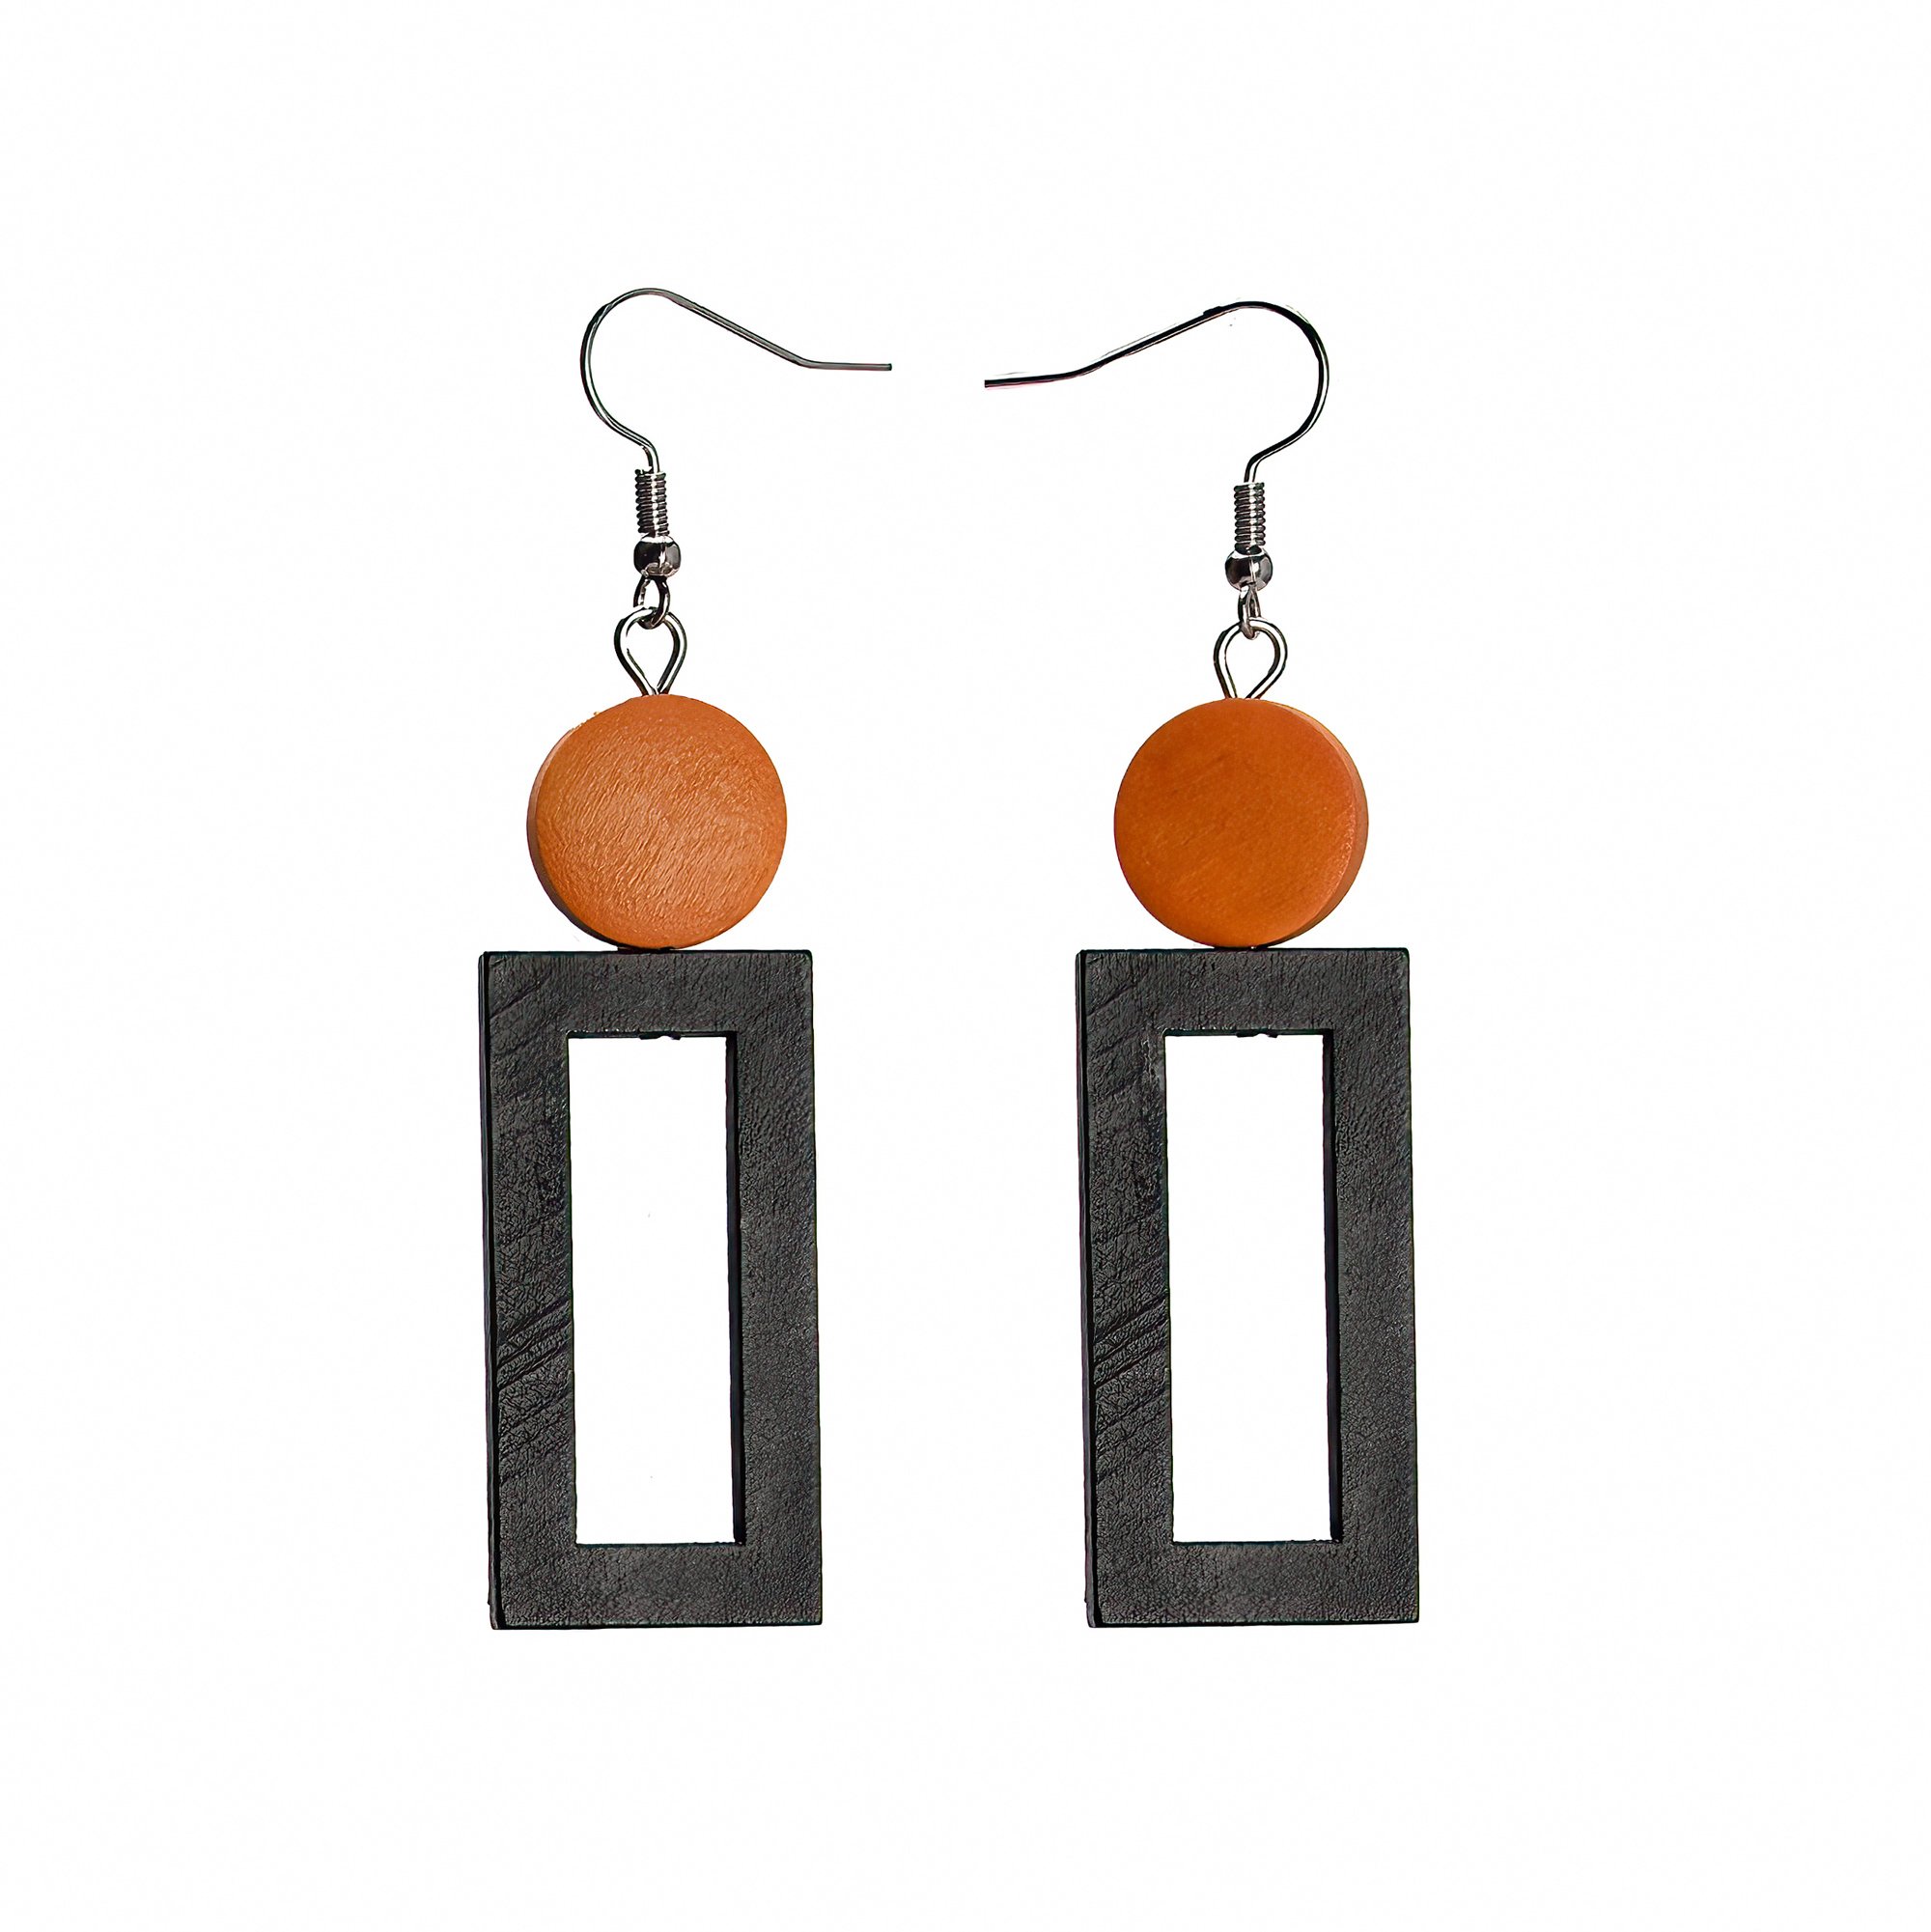  Fancy square wood earings on white background 